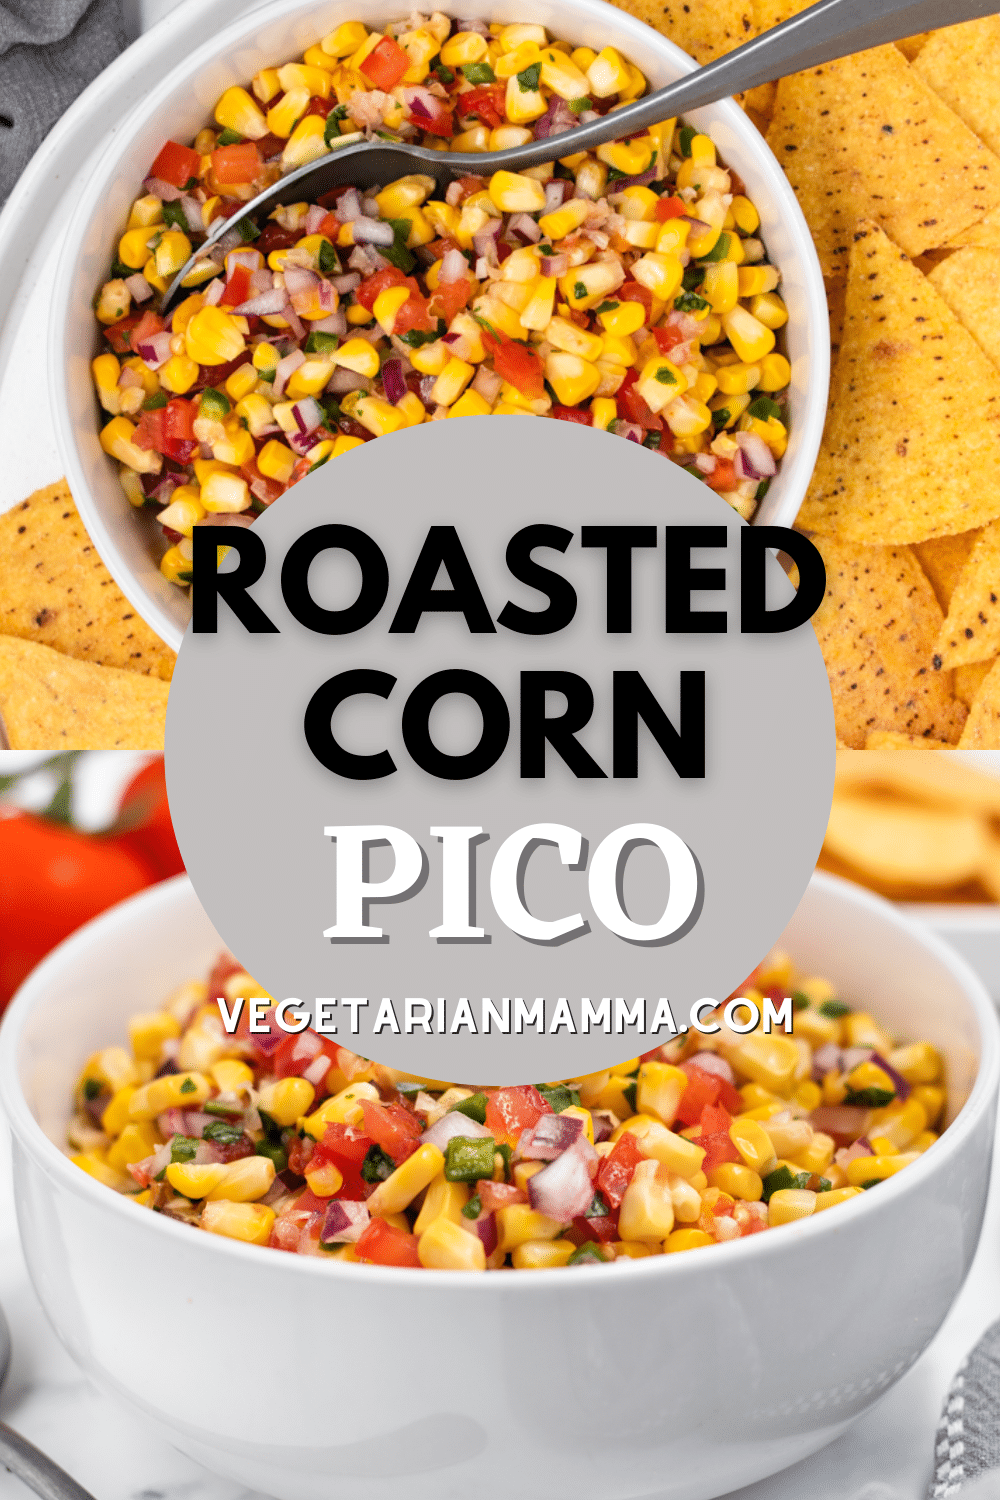 This easy recipe for Roasted Corn Pico is fresh, tasty, and even better than you can get at a restaurant! Corn pico is sweet, spicy, and perfect for tacos and salads.